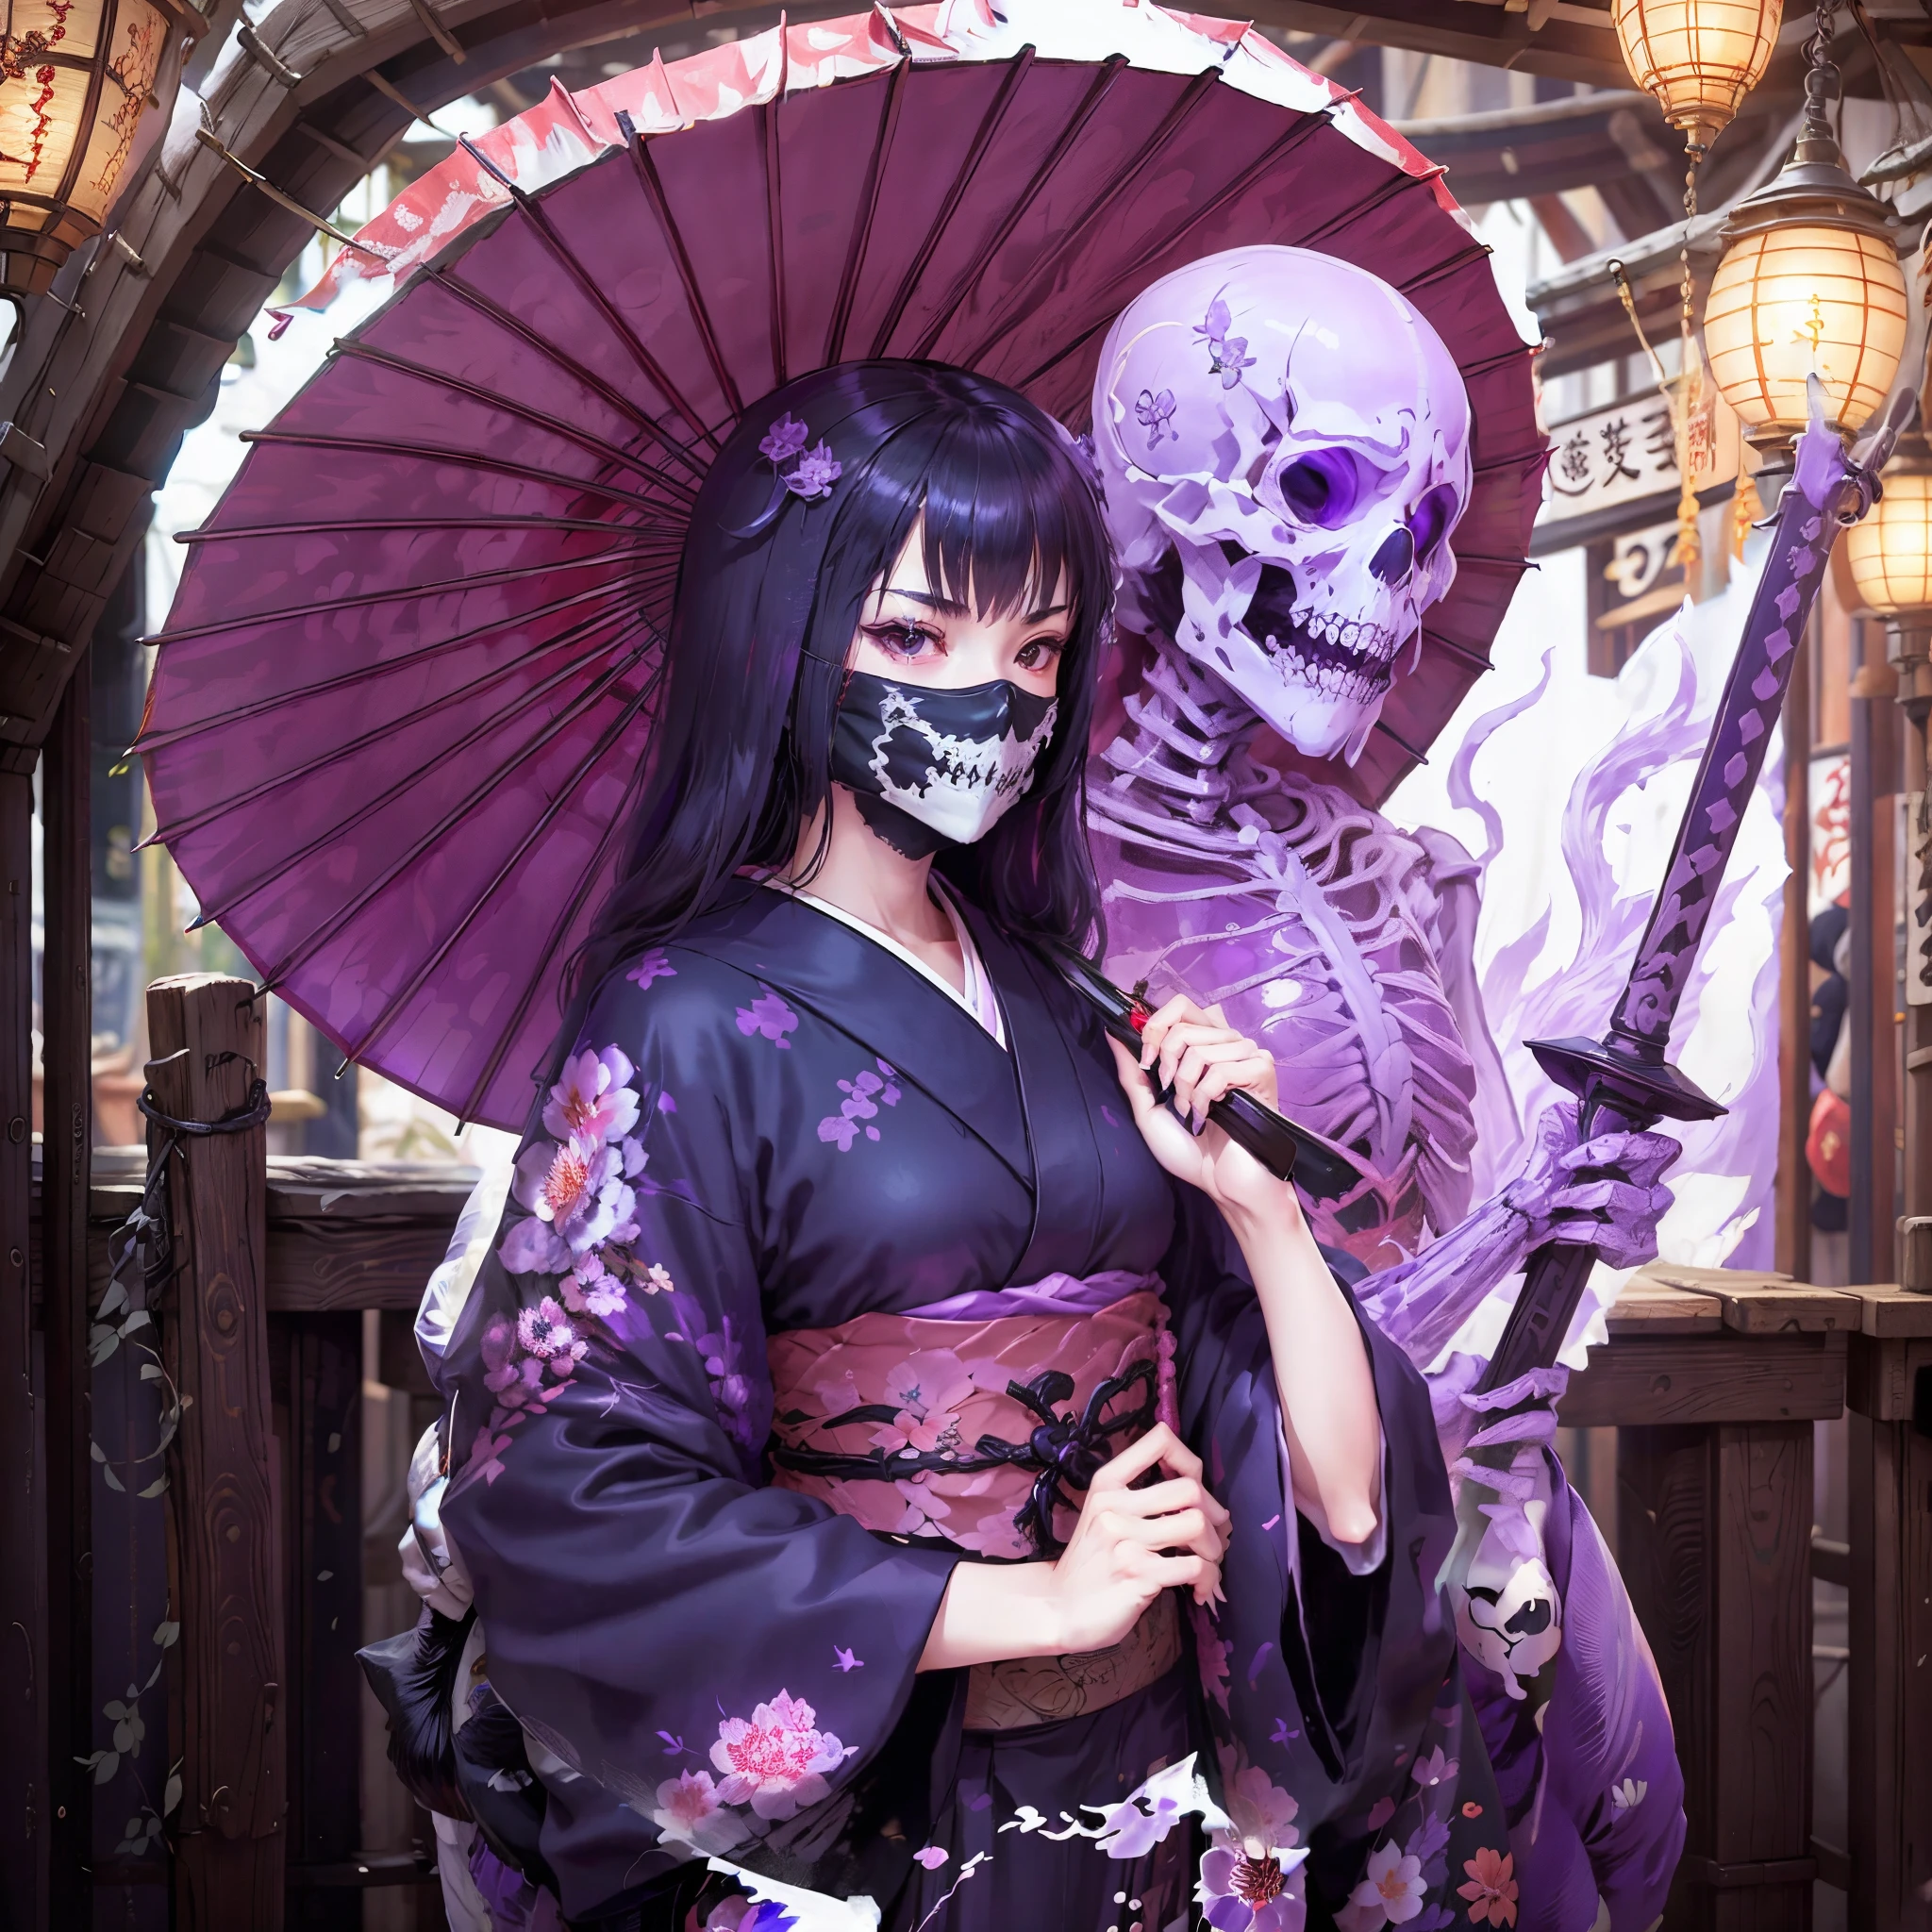 Girl in kimono. she raises her sword. Japanese umbrella. wear bones. A skeleton-shaped mask that covers the mouth. A purple translucent skeleton appears from behind the girl. Purple Flame.